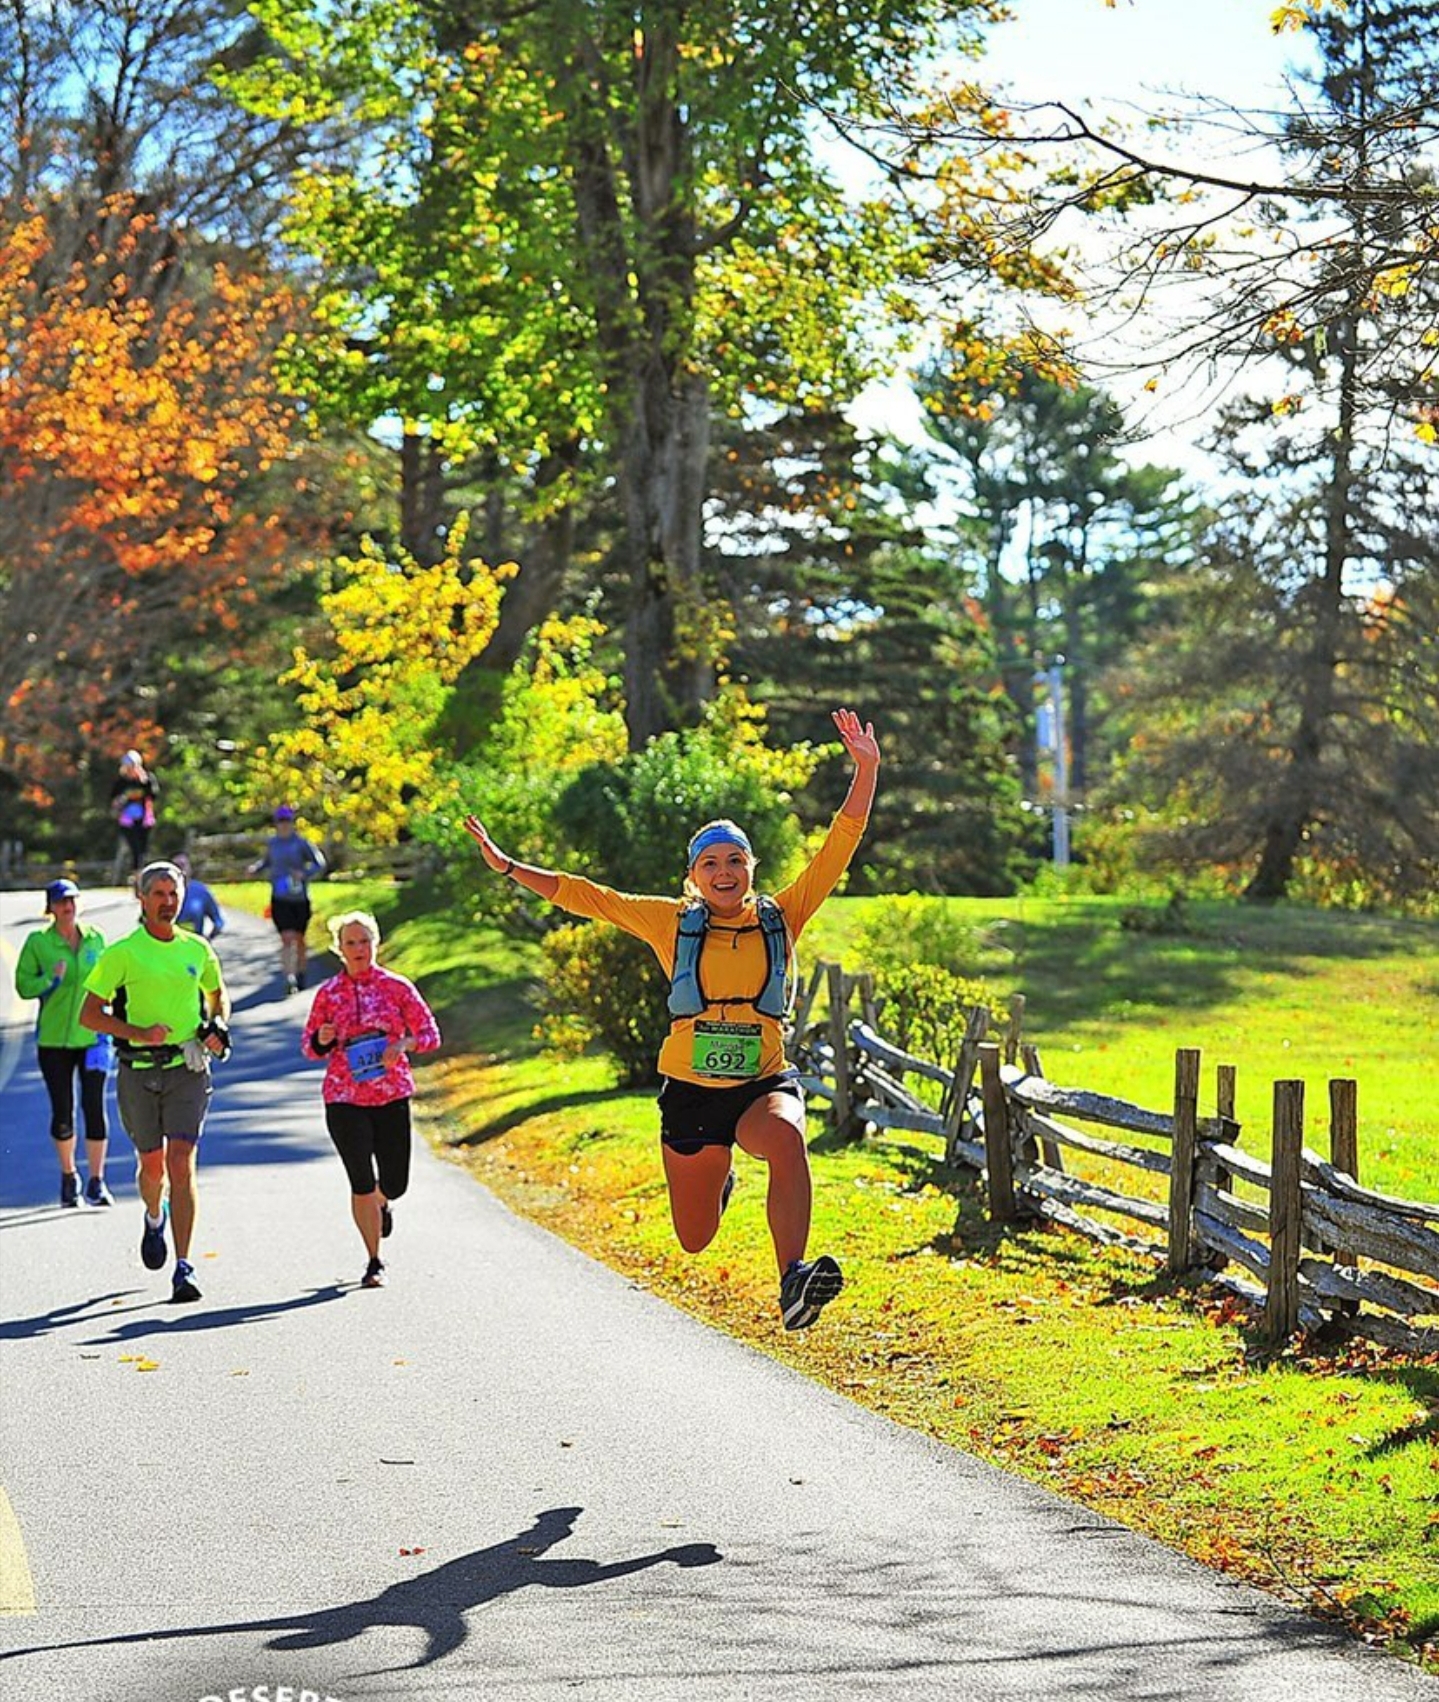 <b>“Complementing my running with upper and lower body strength training and core work gives me the power and stability I need to be a better runner, both on the road and on the trail.” – Marissa Petrozza, Avid Runner, @marissapetrozza</b>“/><figcaption><b>“Complementing my running with upper and lower body strength training and core work gives me the power and stability I need to be a better runner, both on the road and on the trail.” – Marissa Petrozza, Avid Runner, @marissapetrozza</b></figcaption></figure>


<p>Hold up, you’re saying to improve my running performance, I’m supposed to be doing something other than running? Yes, surprisingly so! Weight training is an important activity for runners, and although it may seem counterintuitive, there are plenty of reasons why runners should consider squeezing in a couple of gym sessions alongside their runs. Confused? Read on for everything you need to know about weight training for runners.</p>


<h2>Why is weight training for runners important? </h2>


<p>In the eyes of most runners, the only thing you need to do to get better at running is to create a well-designed running program and, obviously, to ramp up the speed and distance of your runs. That’s not really true. In fact, weight training is one of the <a href=